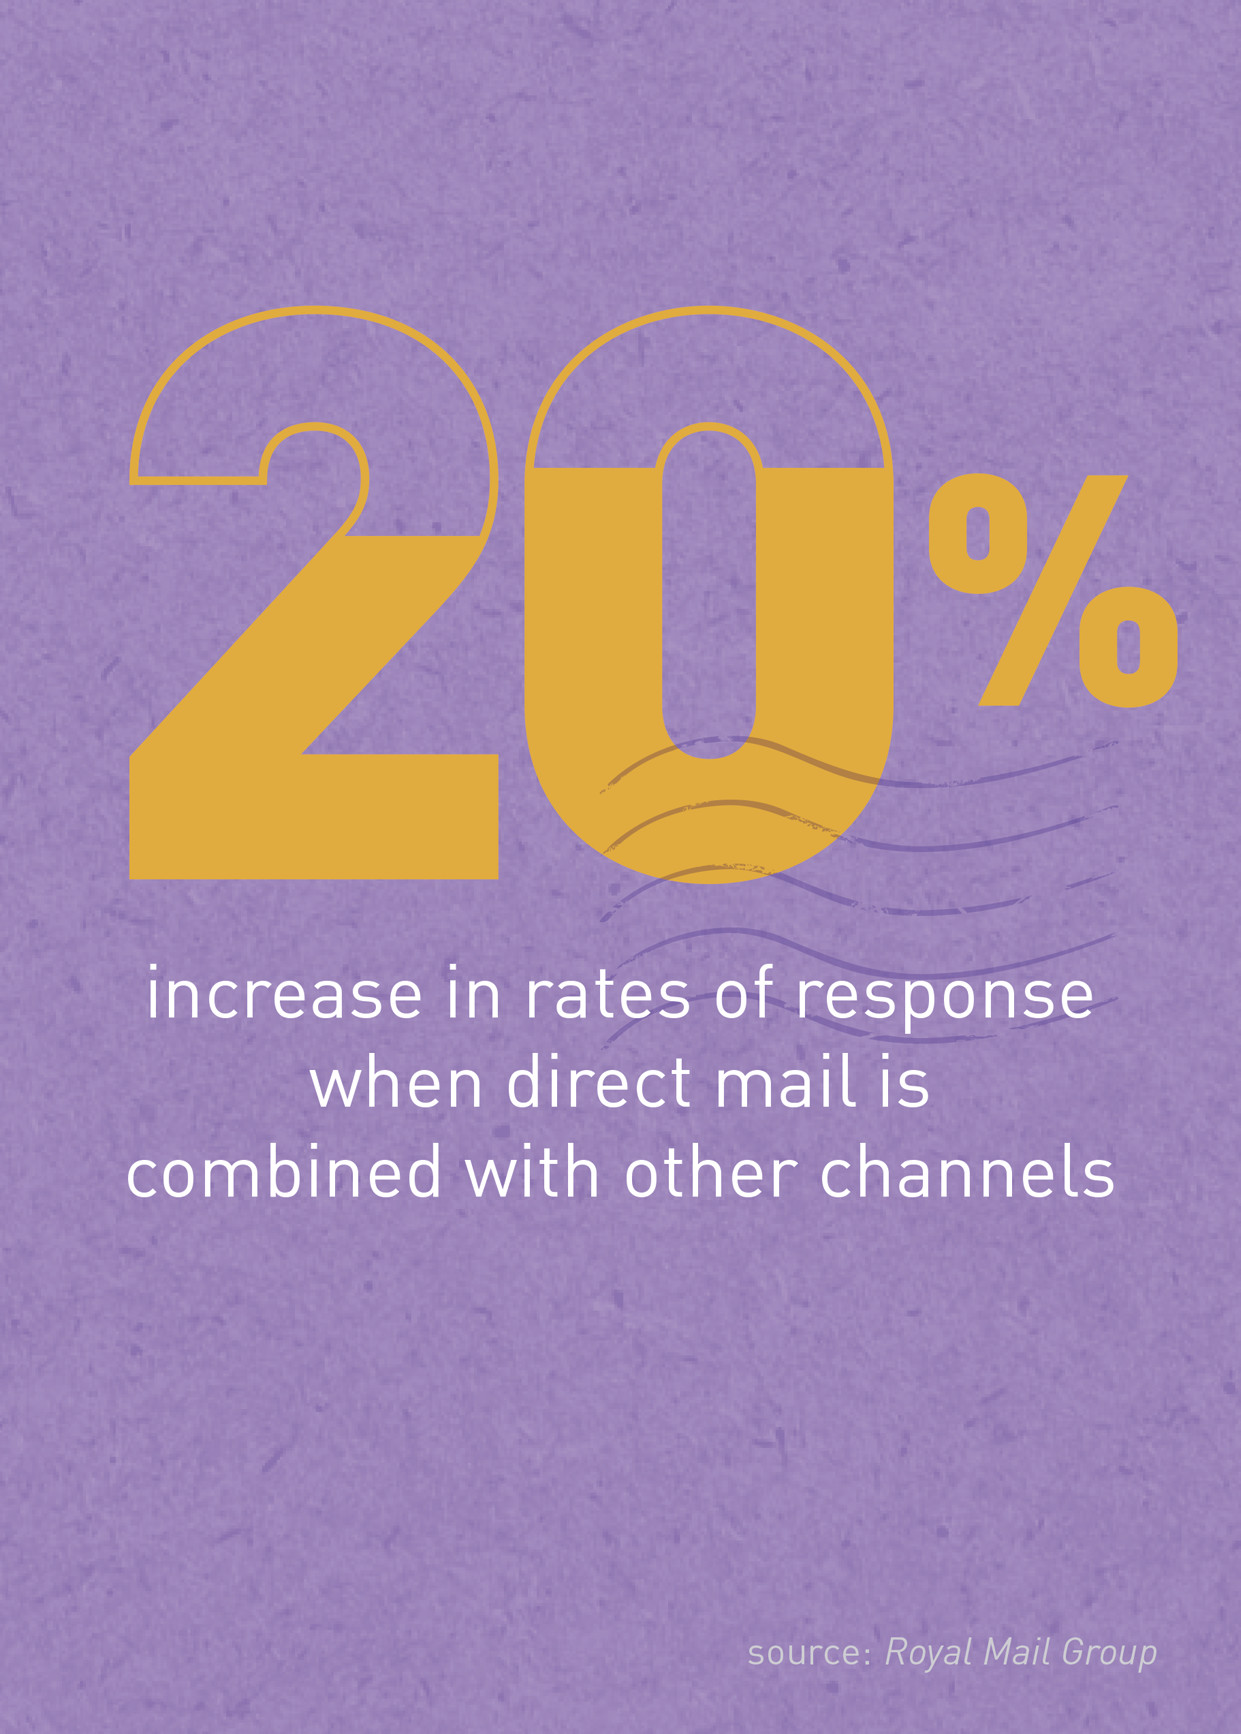 increased rate of response when direct mail combined with other channels